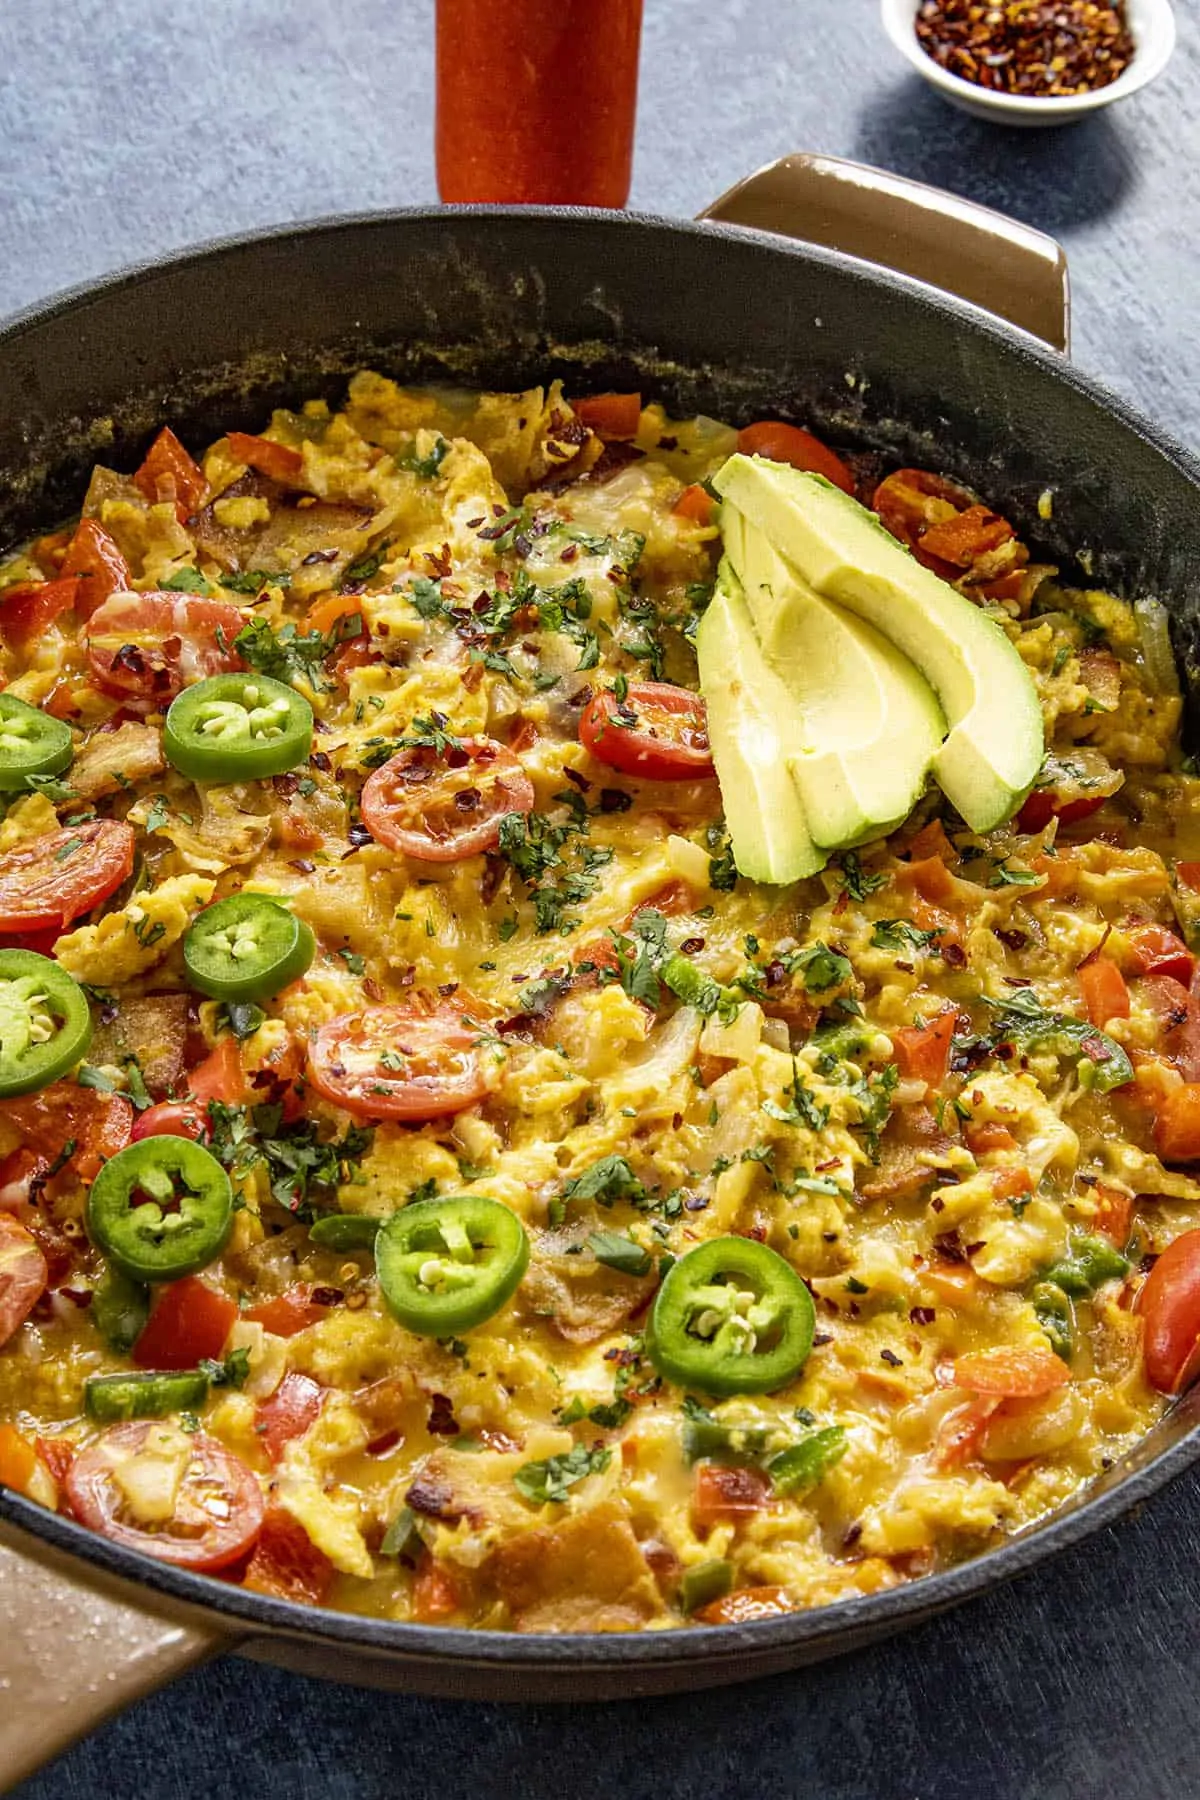 A big pan of Migas (Easy Mexican Scrambled Eggs with Crispy Tortillas), ready to serve